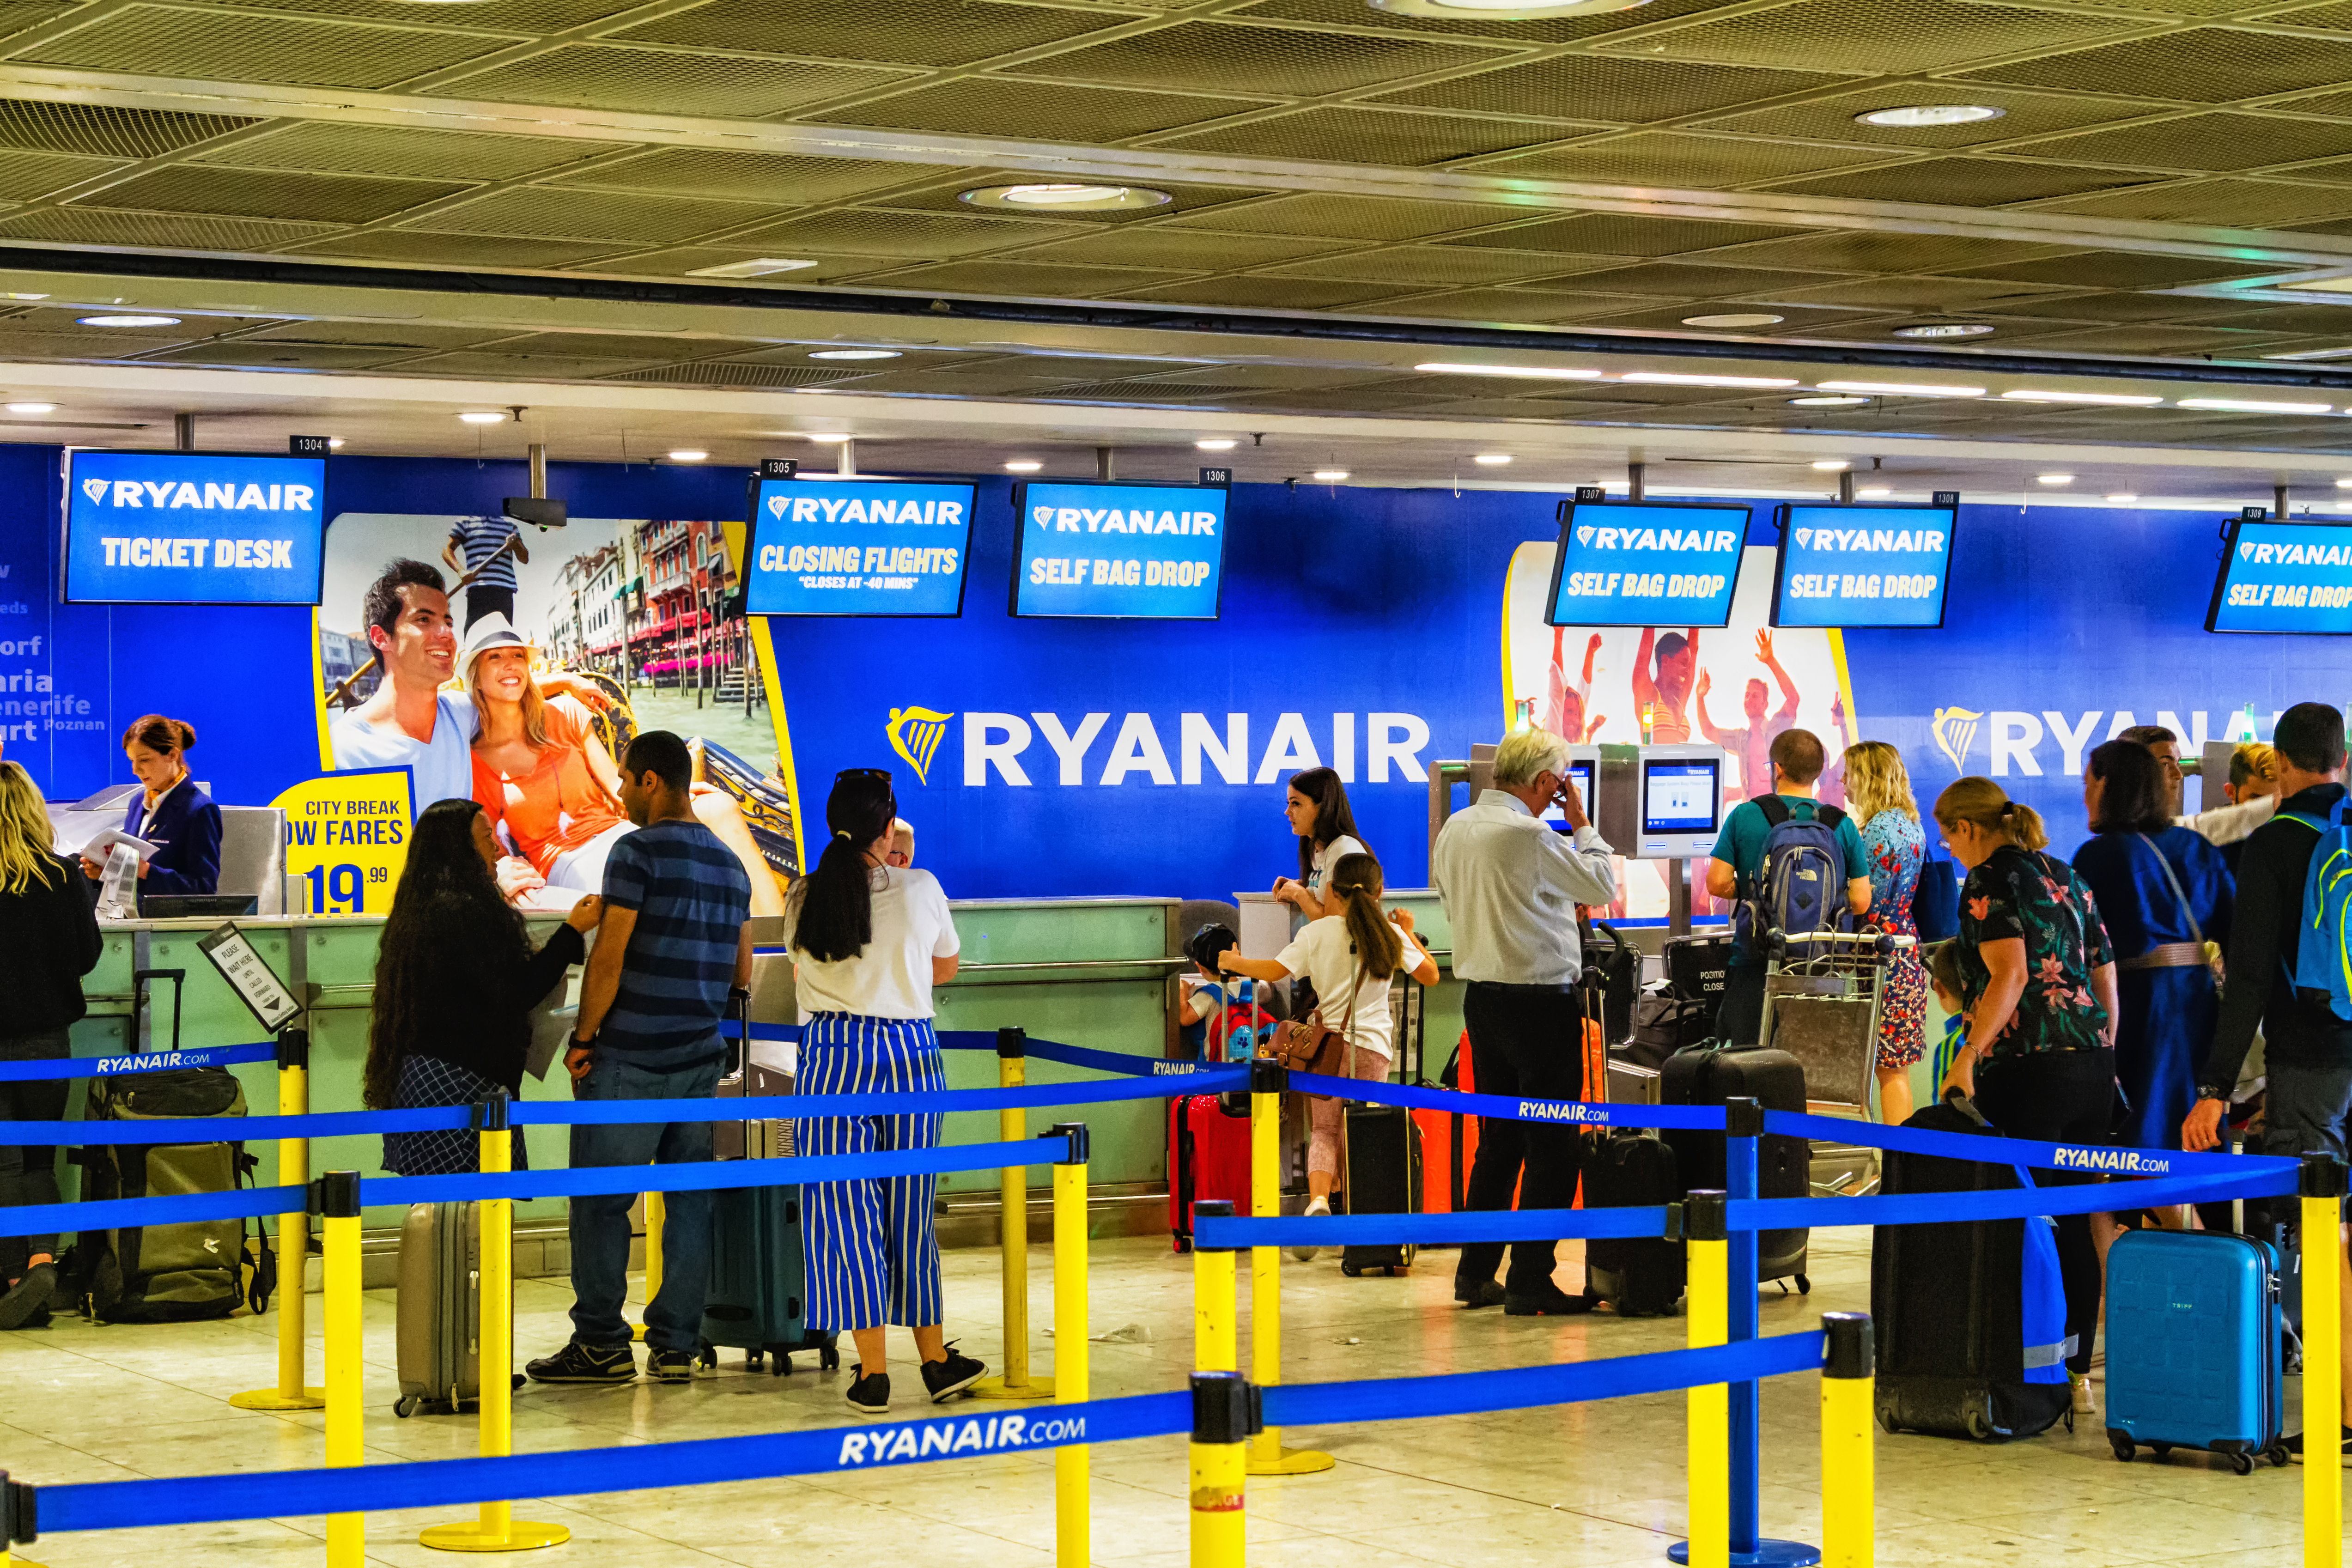 Several passengers checking in for Ryanair flights.